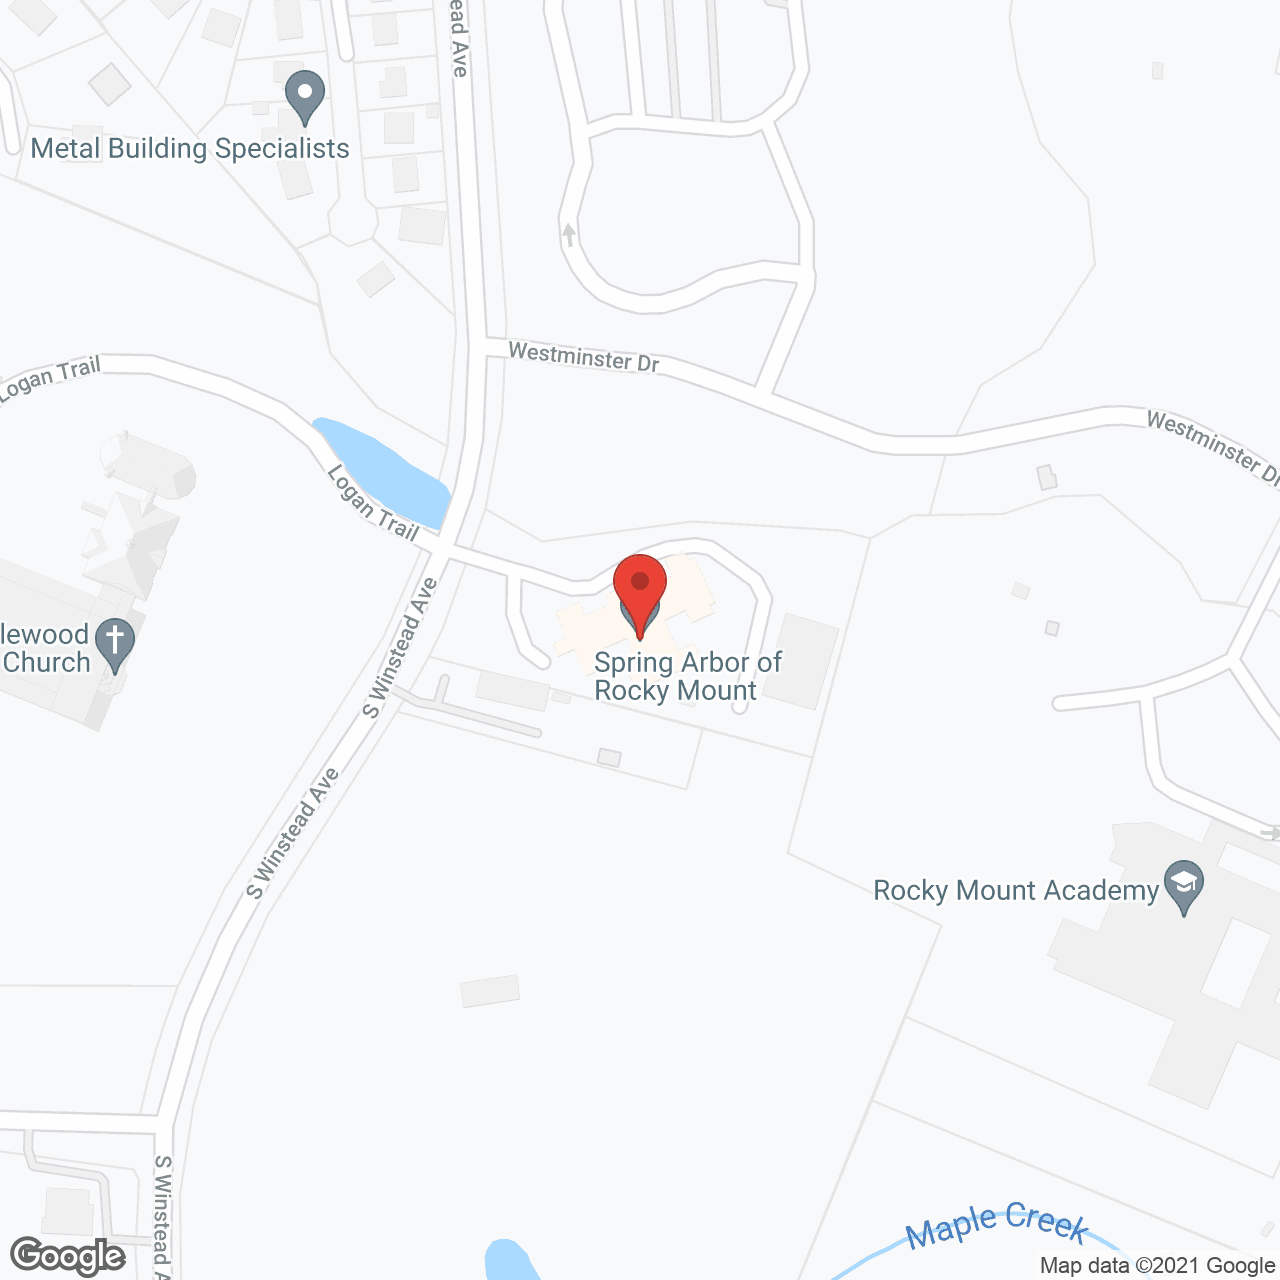 Spring Arbor of Rocky Mount in google map